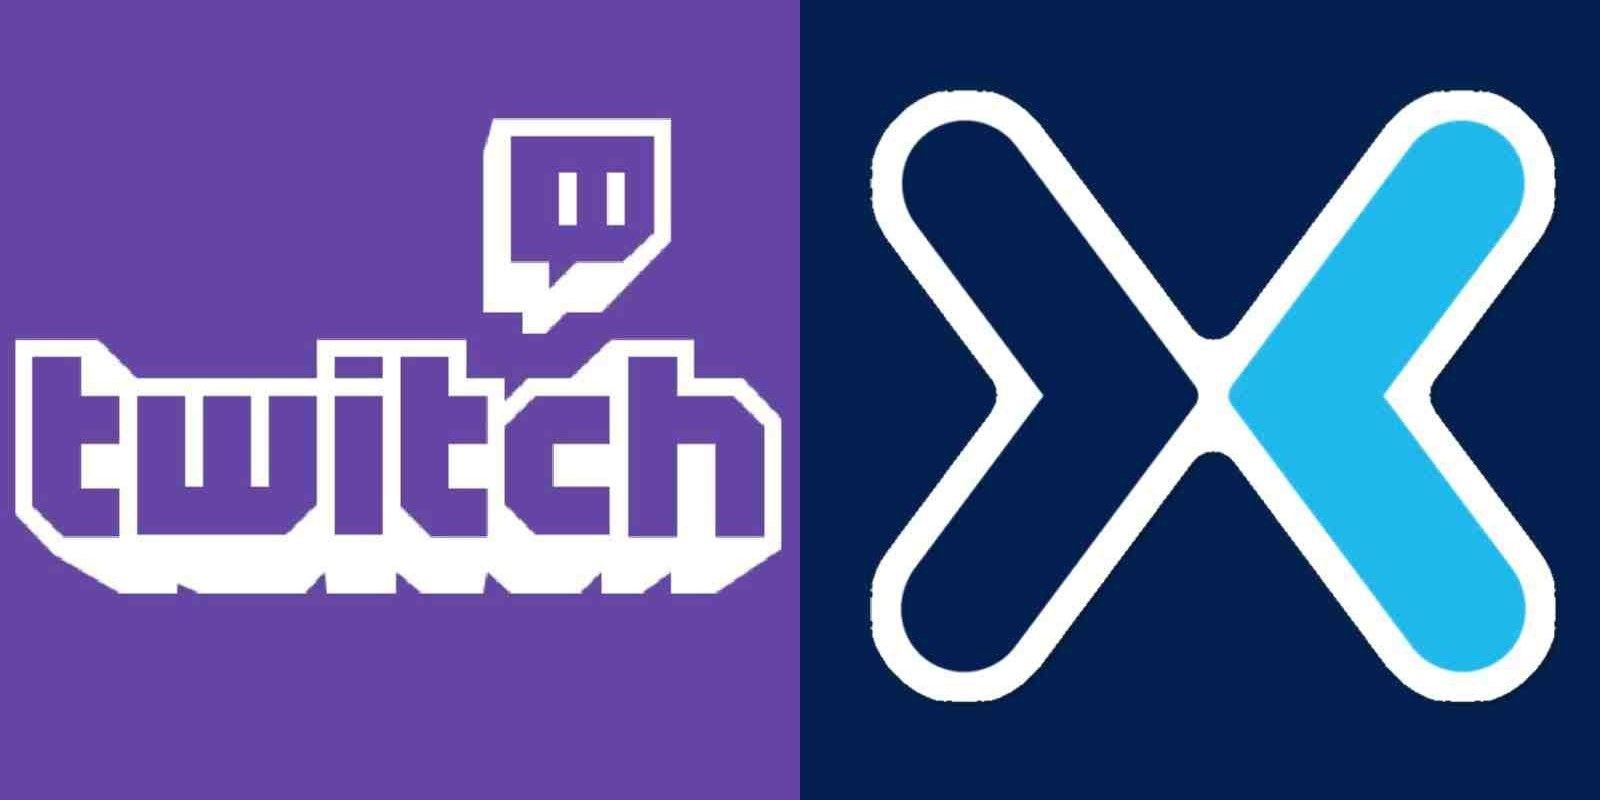 Mixers Push For Big Name Streamers Came At A Steep Cost For Smaller Communities Says Report